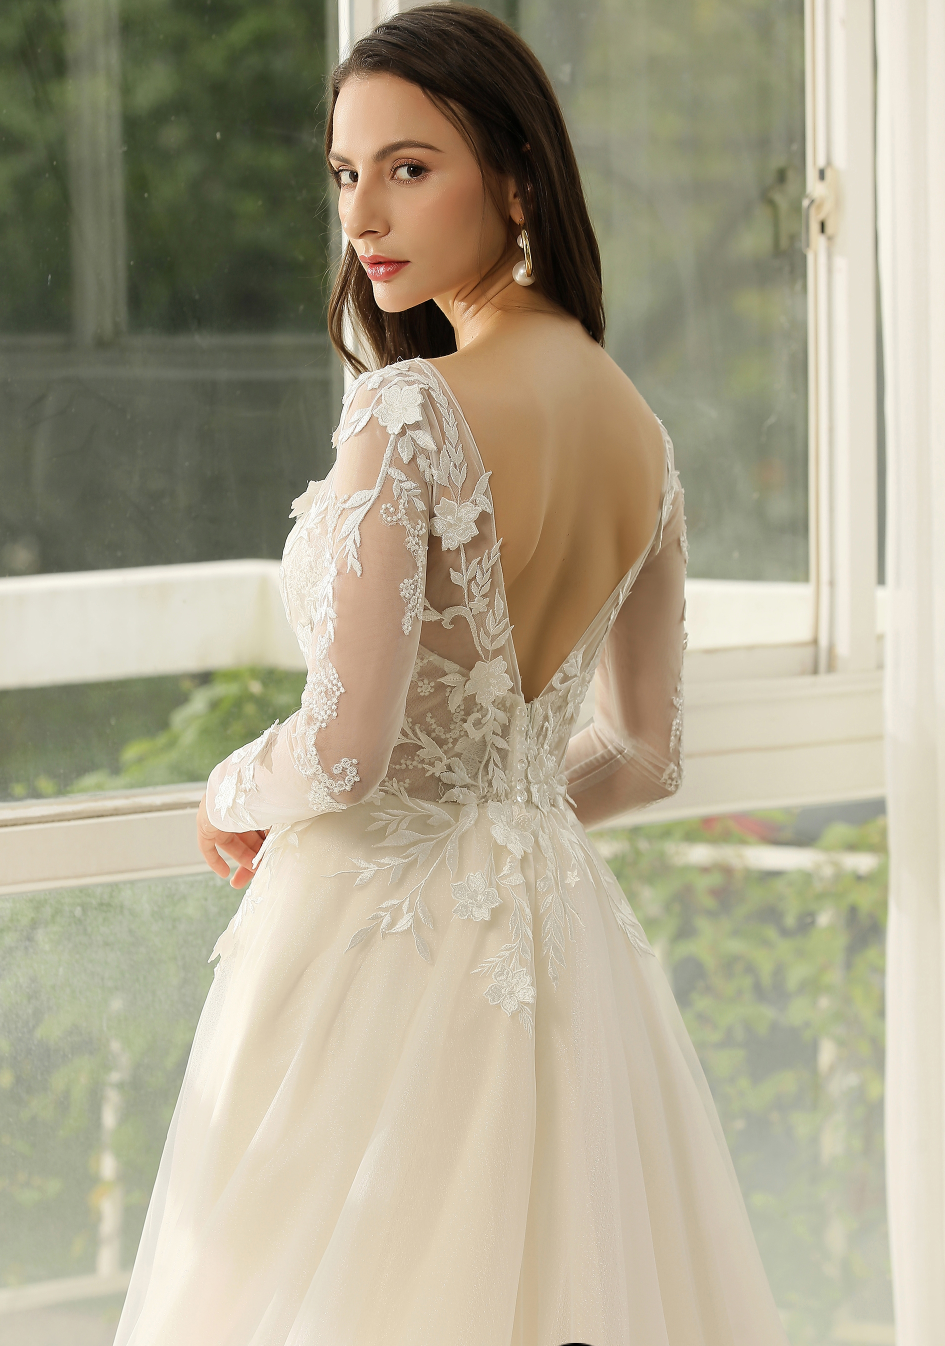 Princess Lace Wedding Dress with Long sleeves